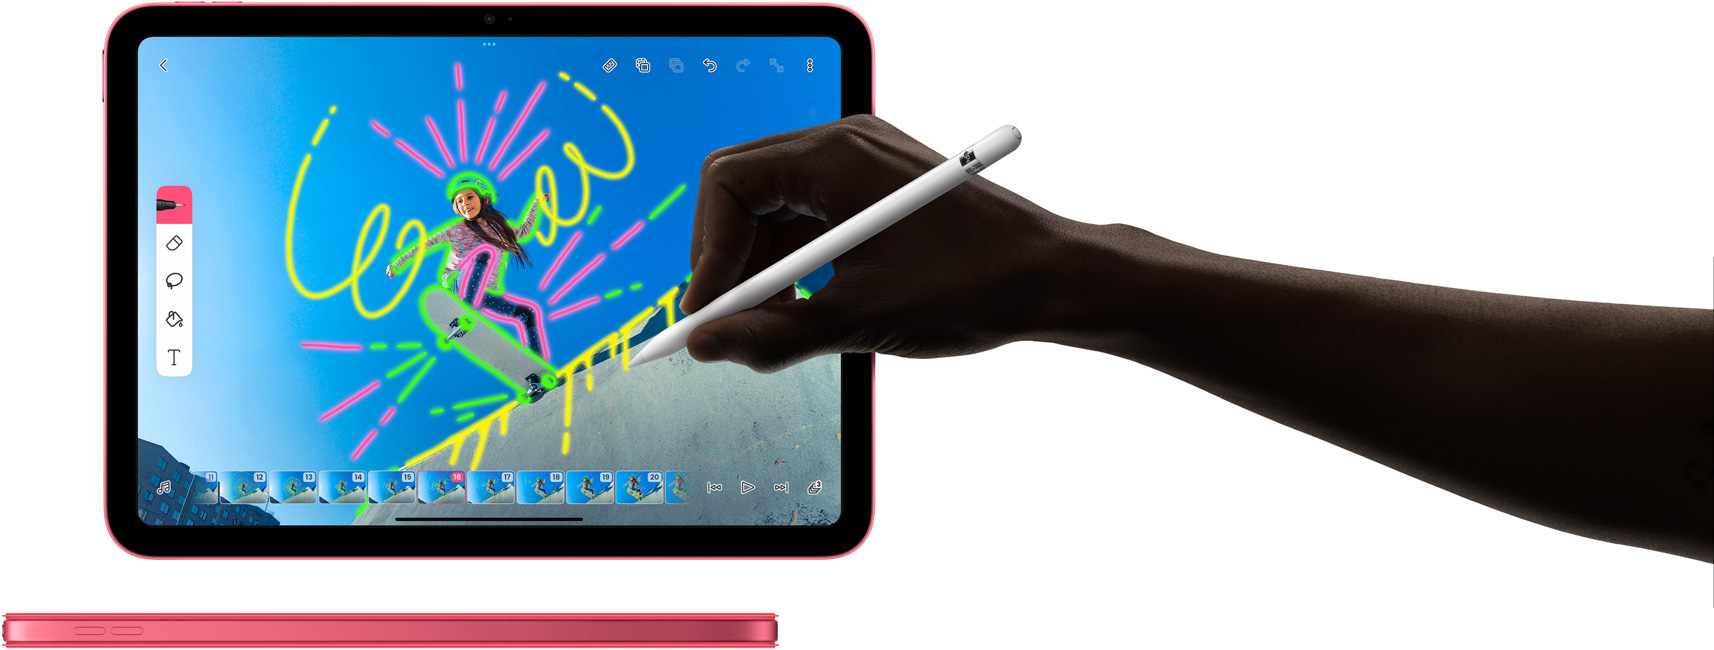 Using Apple Pencil in FlipaClip and side view of pink iPad with matching Smart Folio cover